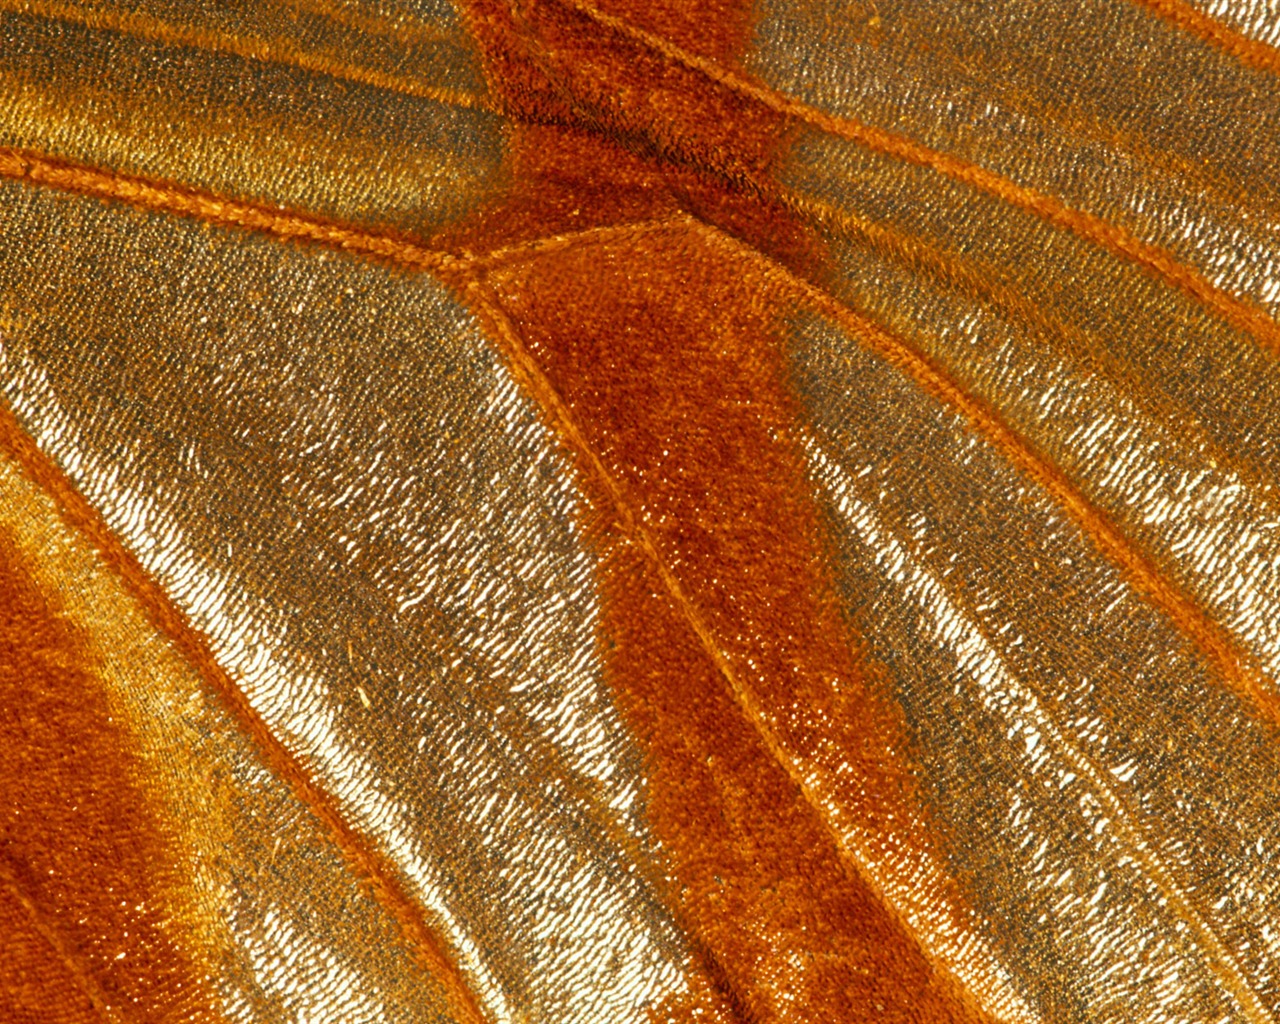 Colorful feather wings close-up wallpaper (2) #11 - 1280x1024